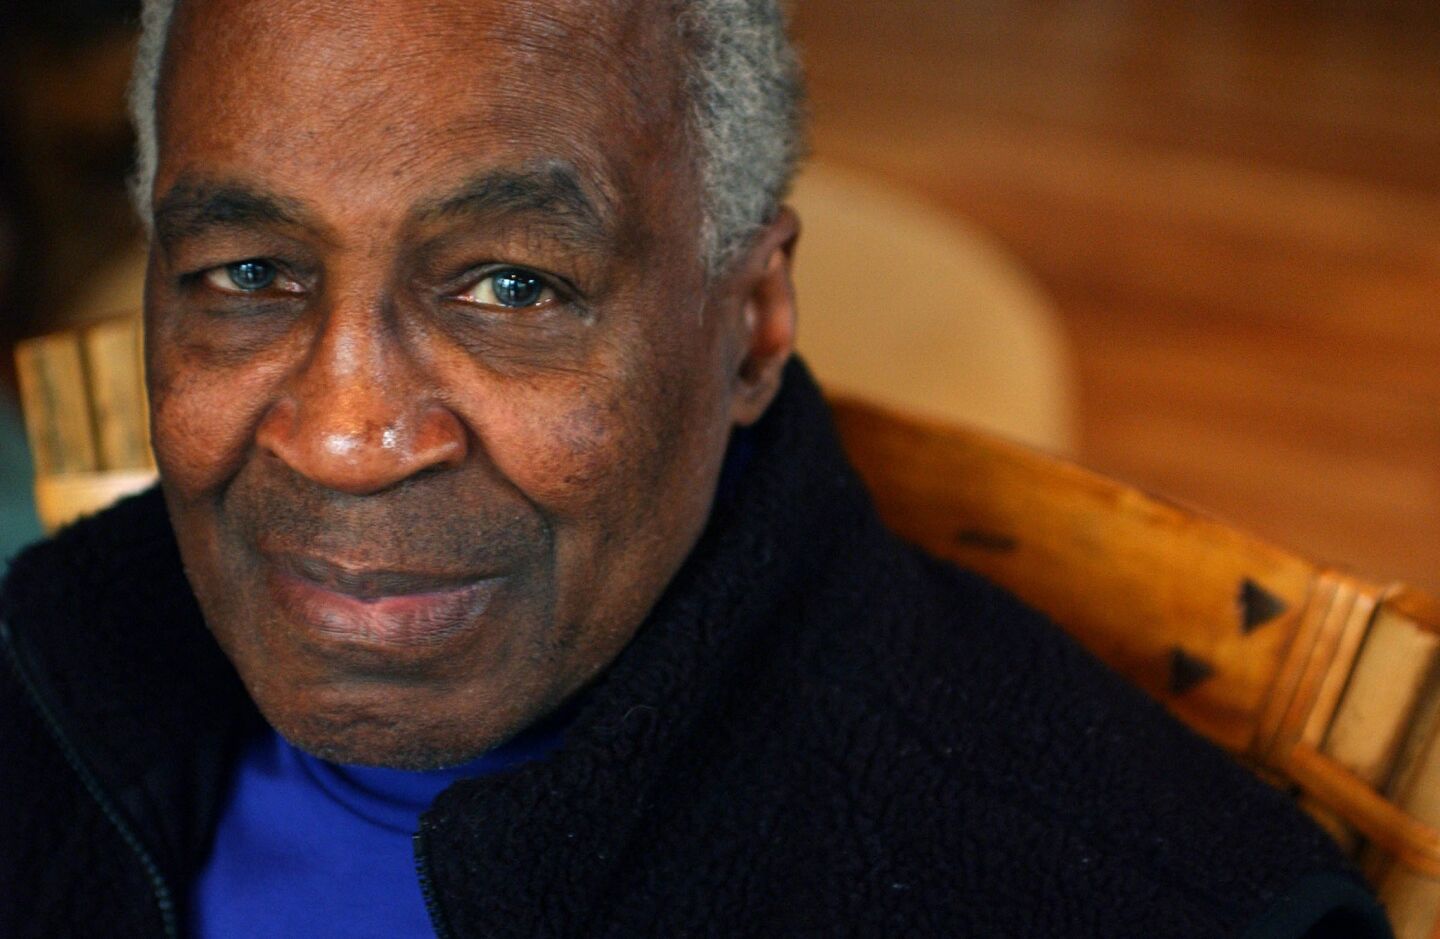 Best known for his portrayal of the sharp-tongued butler in the TV sitcoms "Soap" and "Benson," Guillaume also played Nathan Detroit in the first all-black version of "Guys and Dolls" and became the first African American to sing the title role in "The Phantom of the Opera," appearing with an otherwise all-white cast in Los Angeles. He was 89. Full obituary